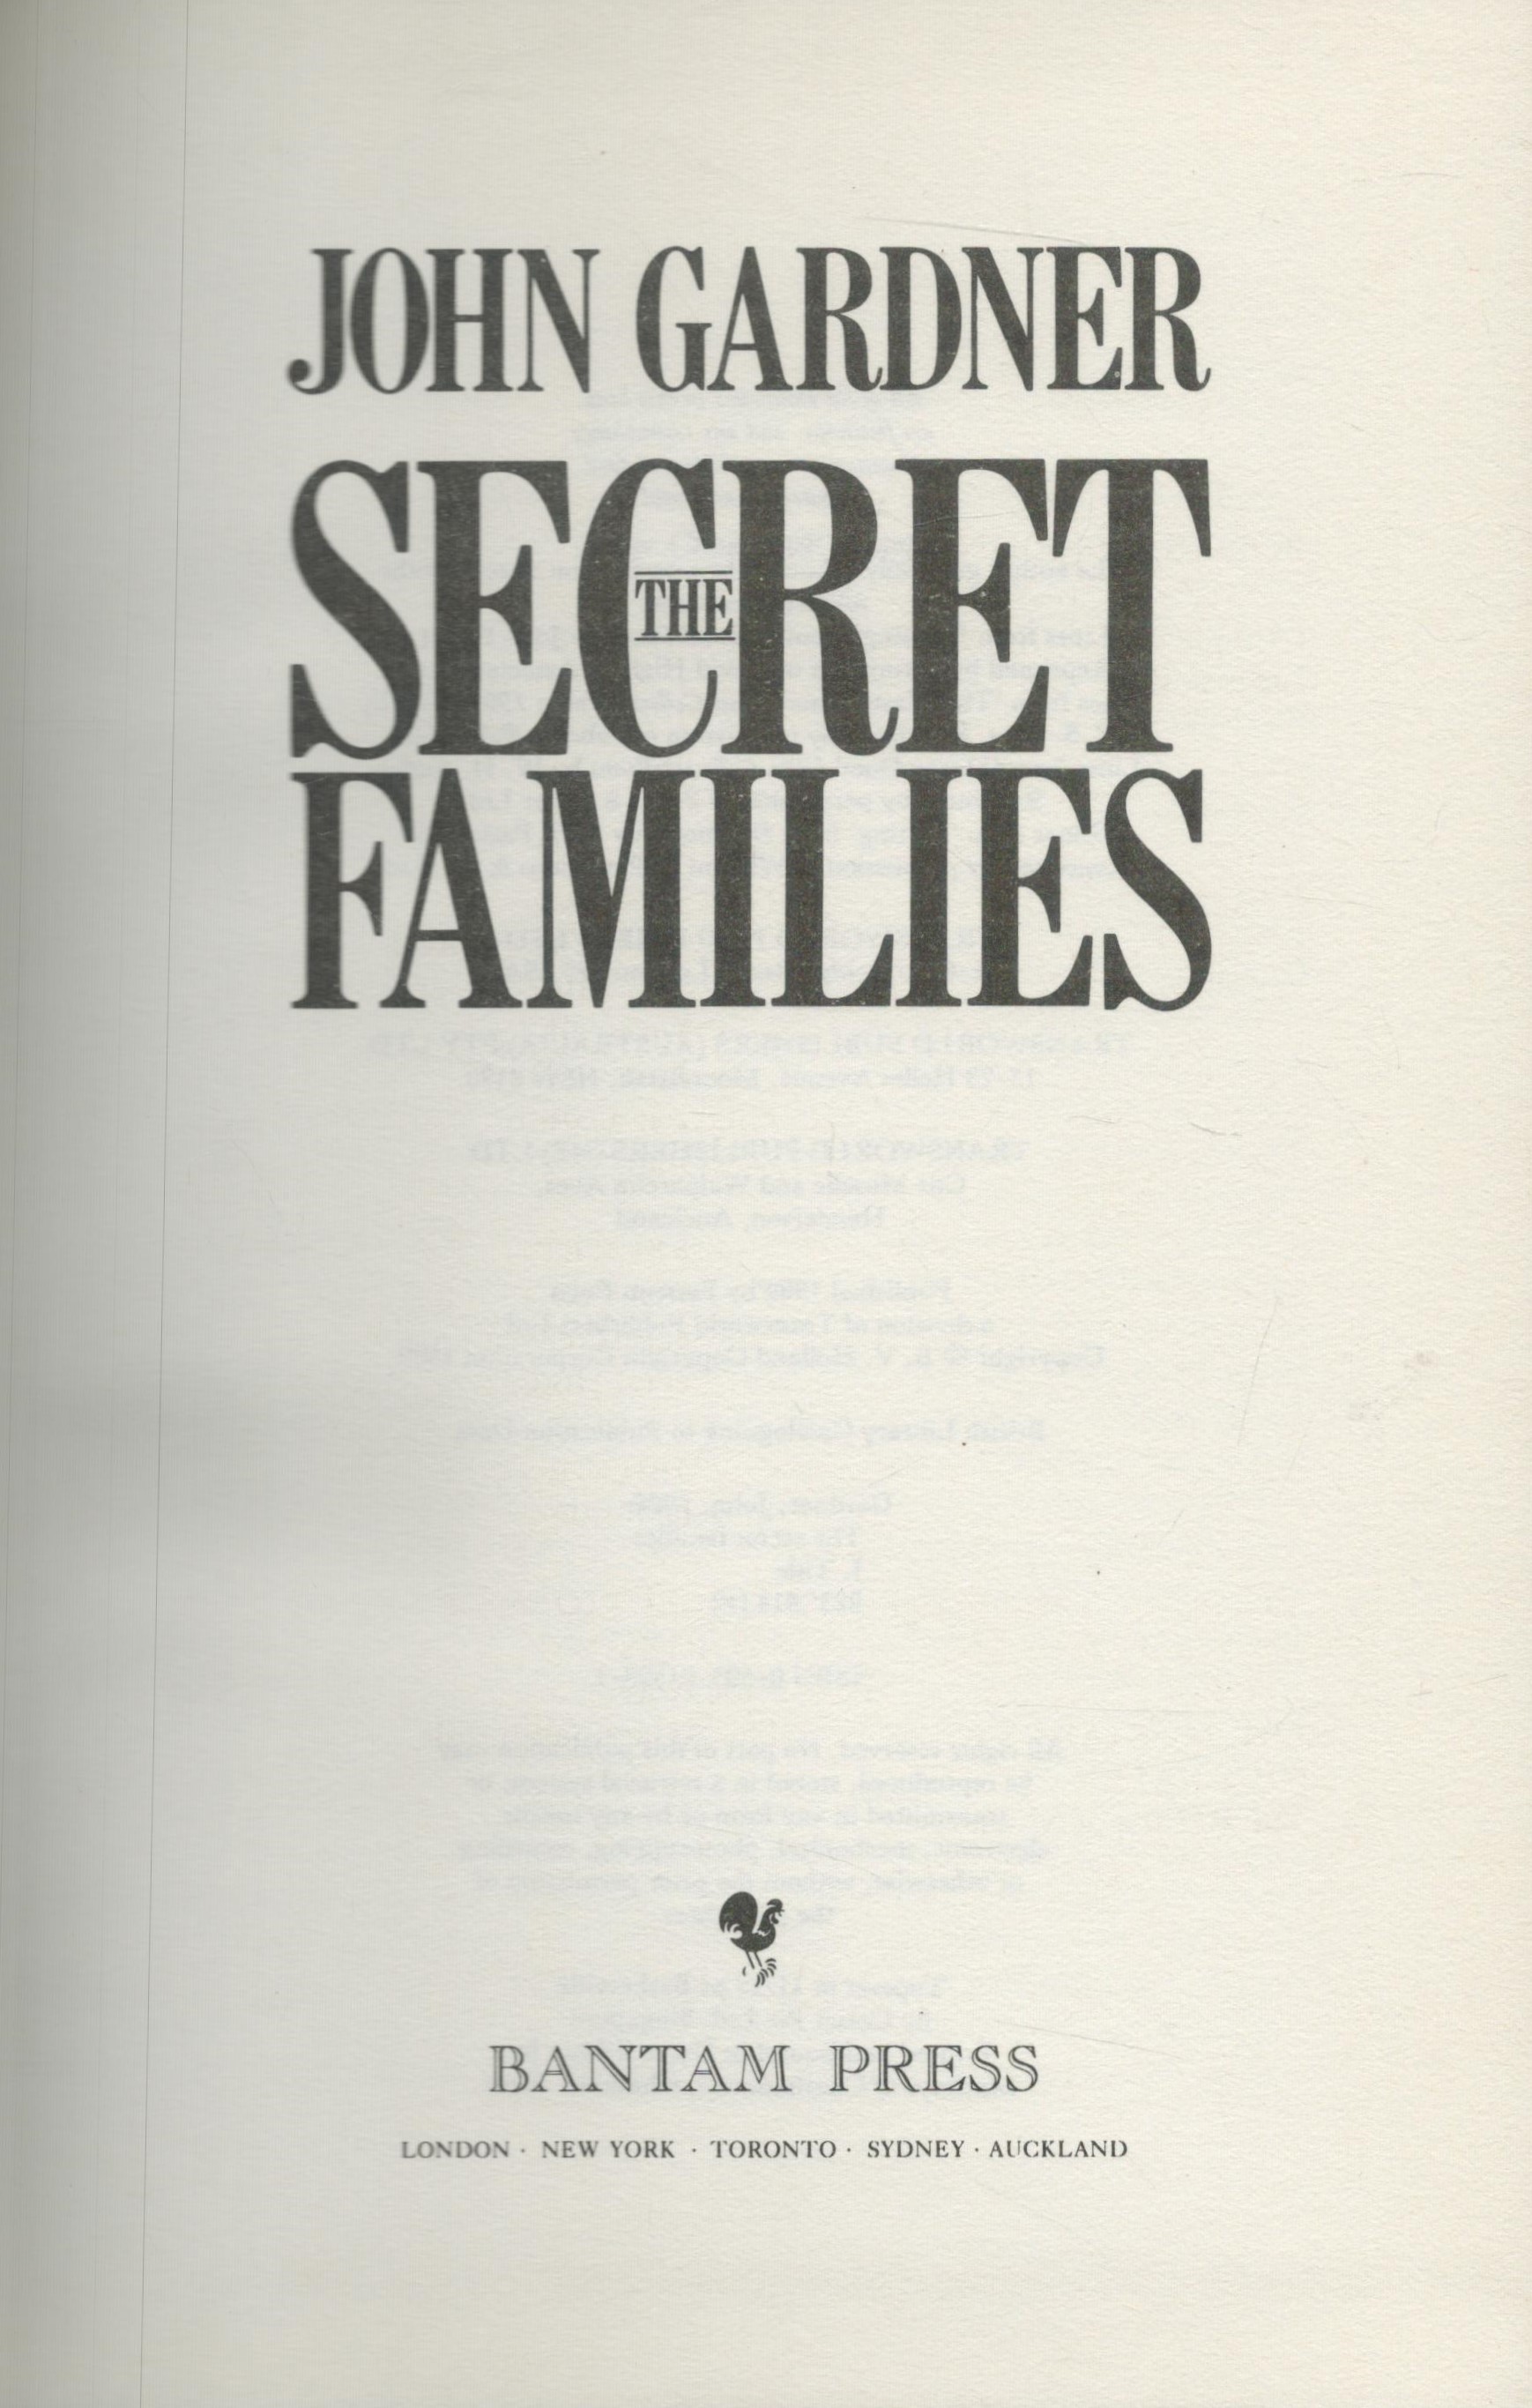 The Secret Families by John Gardner 1989 hardback book with 395 pages, early signs of ageing, good - Image 2 of 3